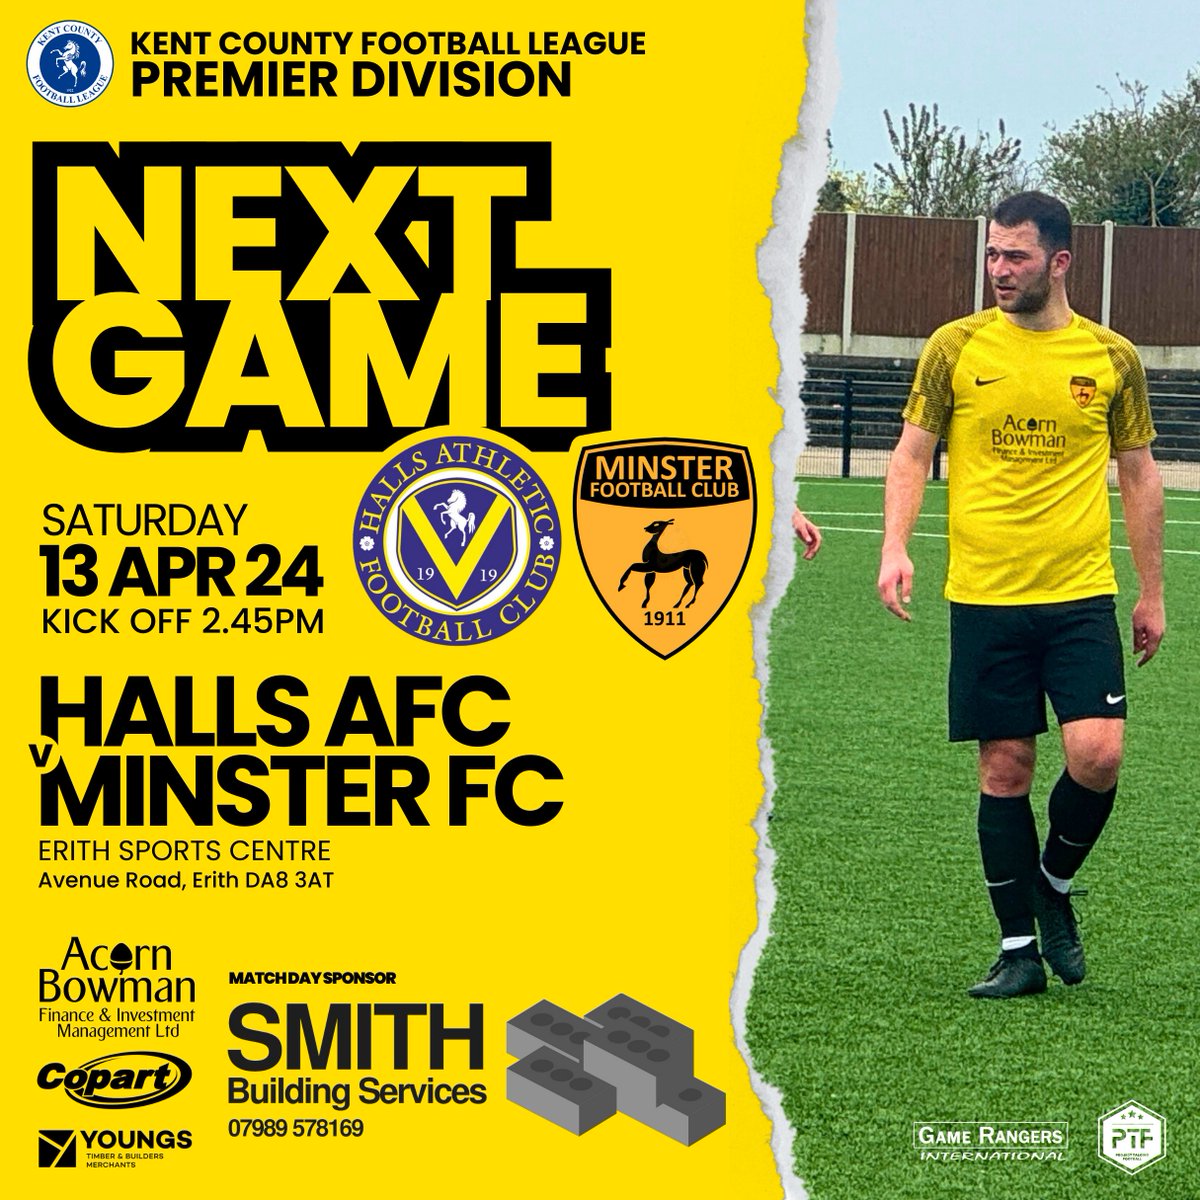 FIRST TEAM : NEXT GAME
🆚 @HAFCOfficial
🏆 @KCFL1516 Premier Division
📅 13 APR 24
⏰ 2.45pm Kick off
🏟️ Erith Sorts Centre
📍DA8 3AT

Good luck lads !!
#AcornBowmanFinance
@CopartUKLimited
#YoungsTBM

#iloveminster #grassrootsfootball #nonleaguefootball #mcmxi